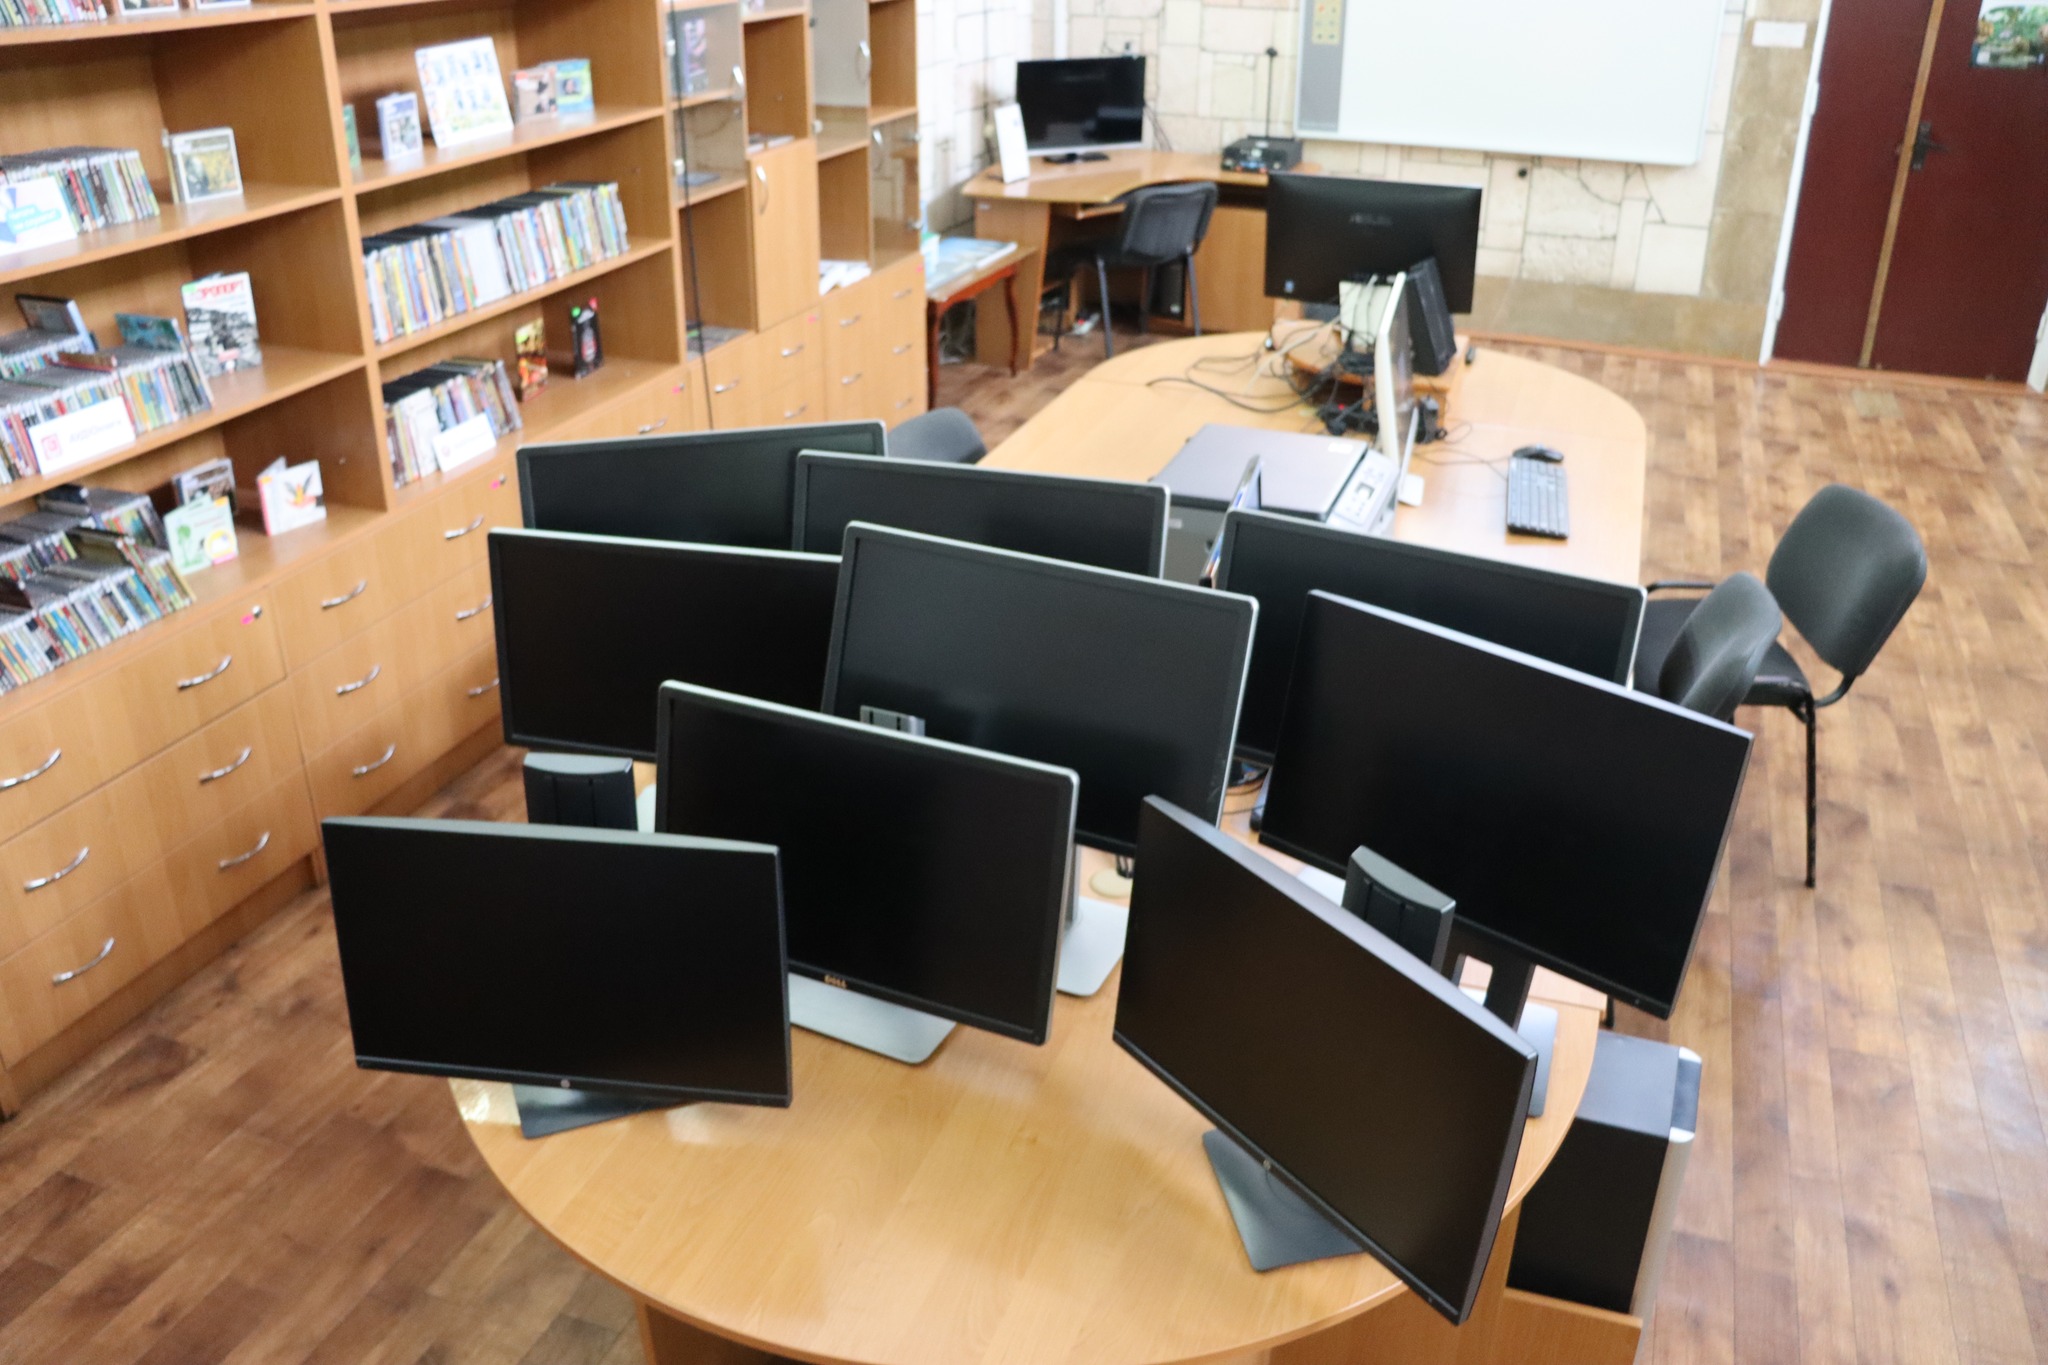 Central city library named after M.L. Kropyvnytskyi received a parcel with modern monitors as a gift